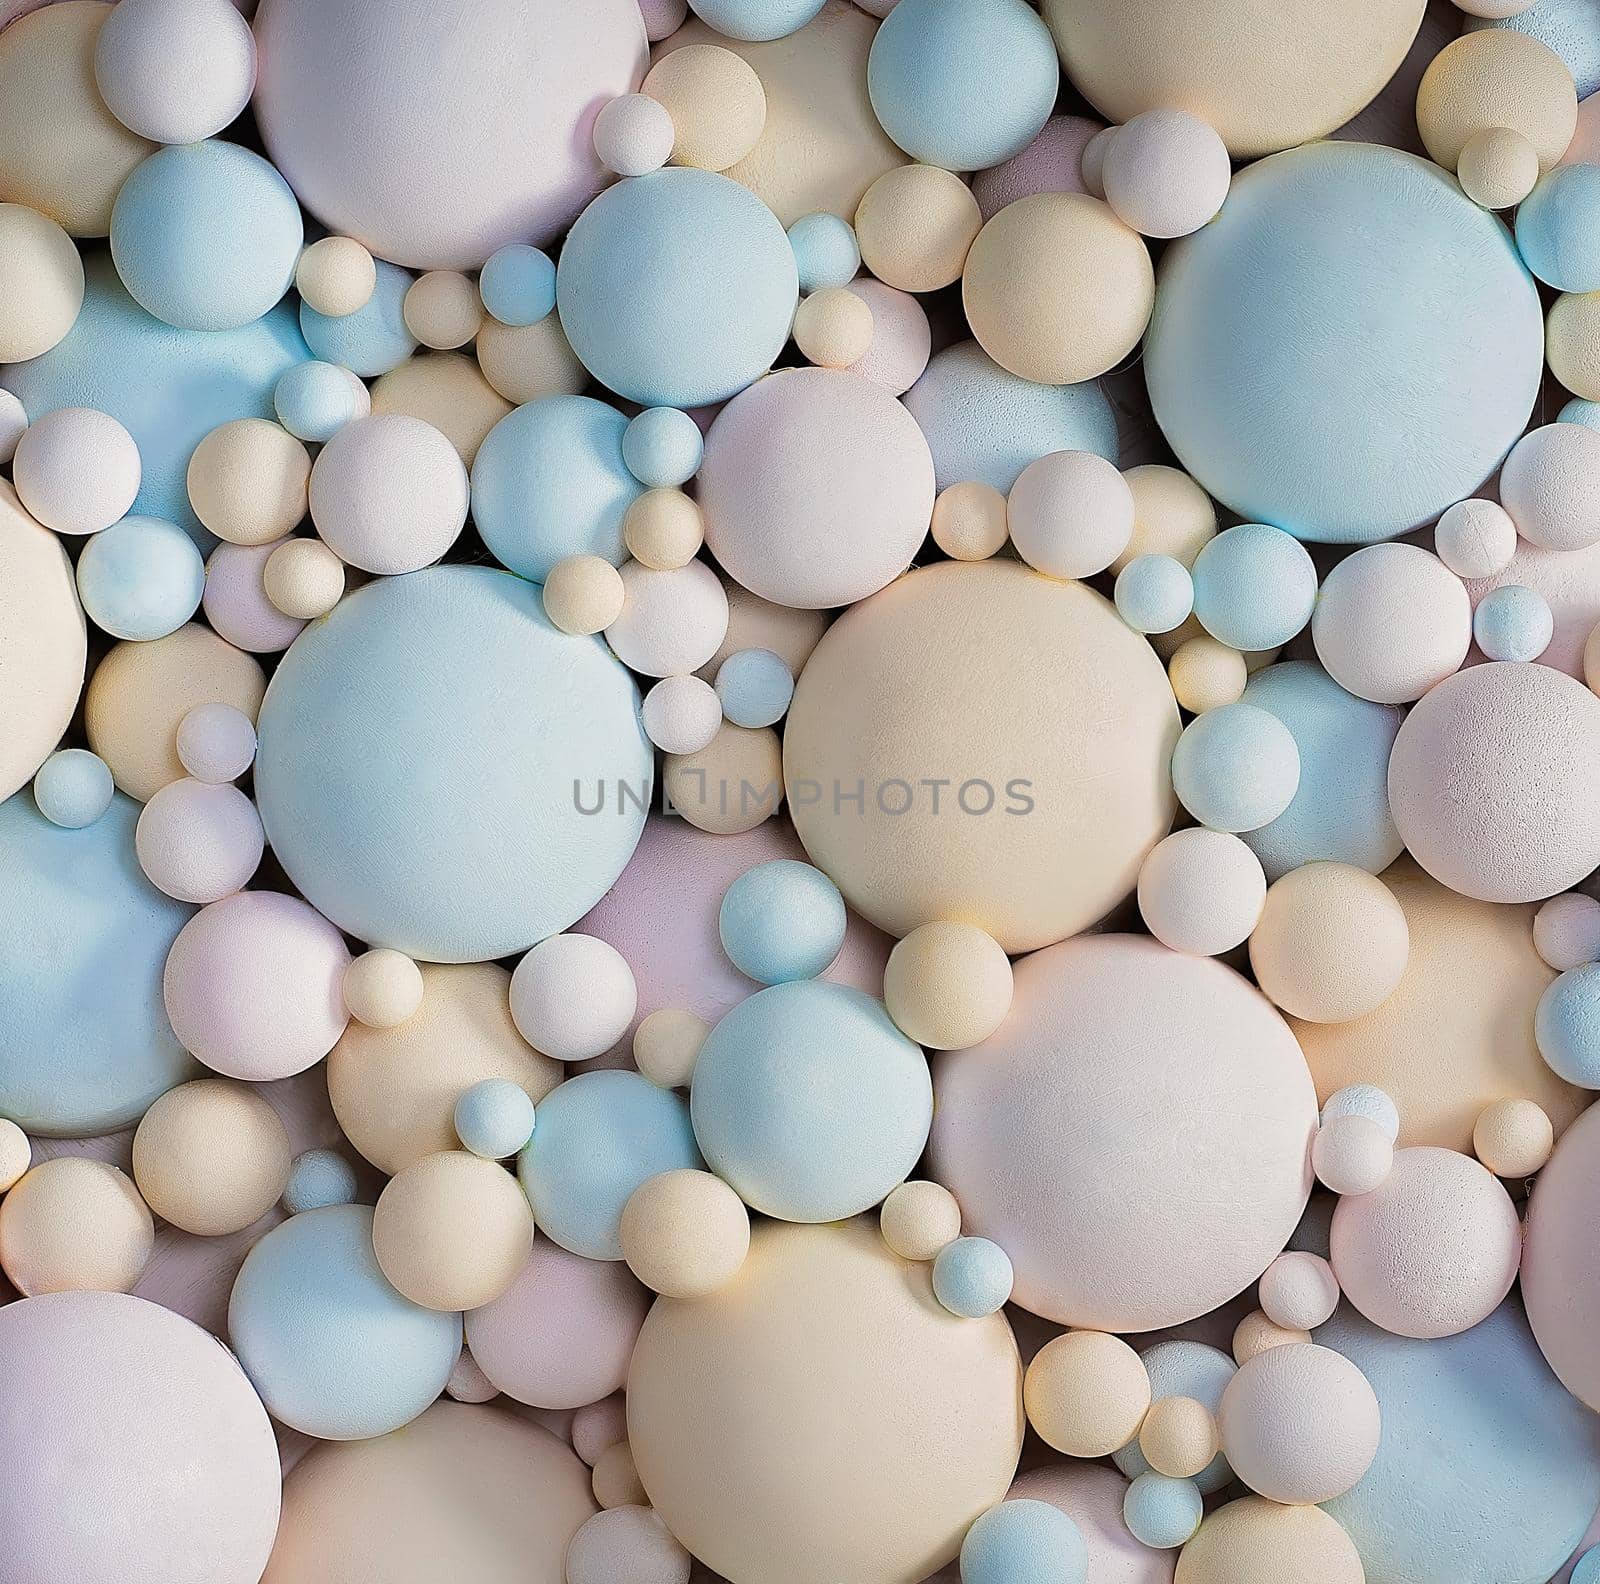 Abstract 3d background with pastel colors matte balls. delicate blue, pink, beige balls different sizes of spherical shape. texture background. Close-up. High quality photo